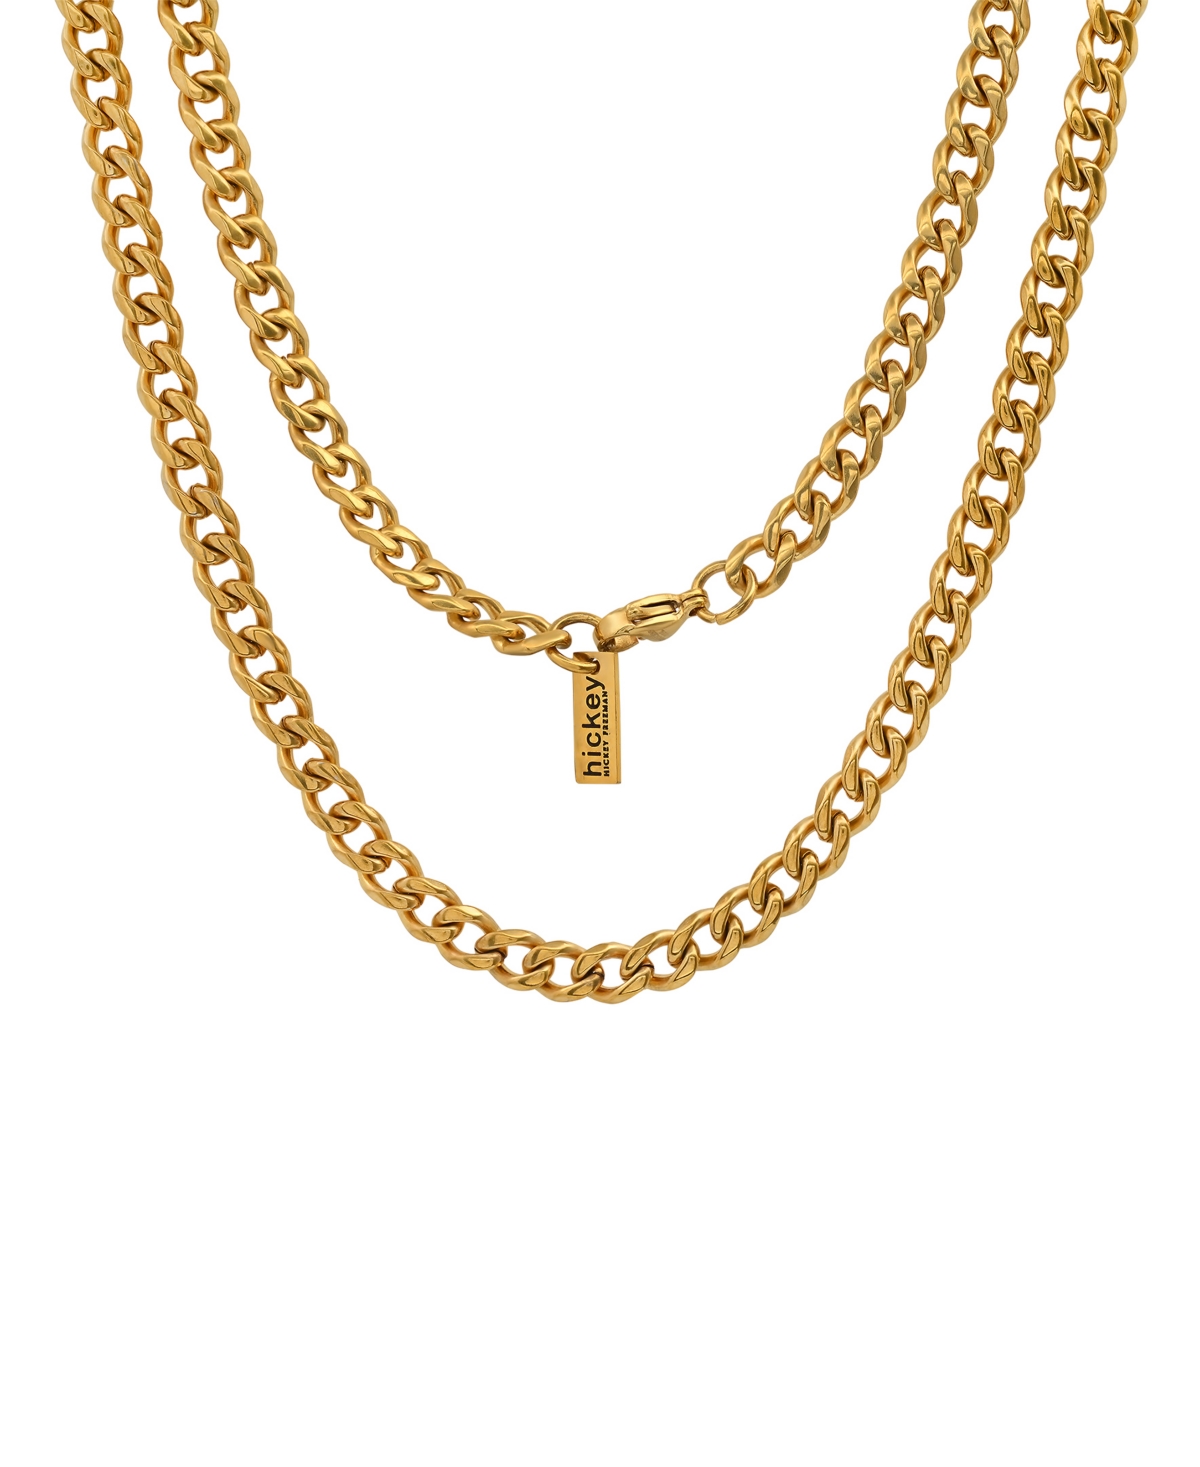 hickey by Hickey Freeman 18K Gold Plated Cuban Link Chain Necklace - Gold